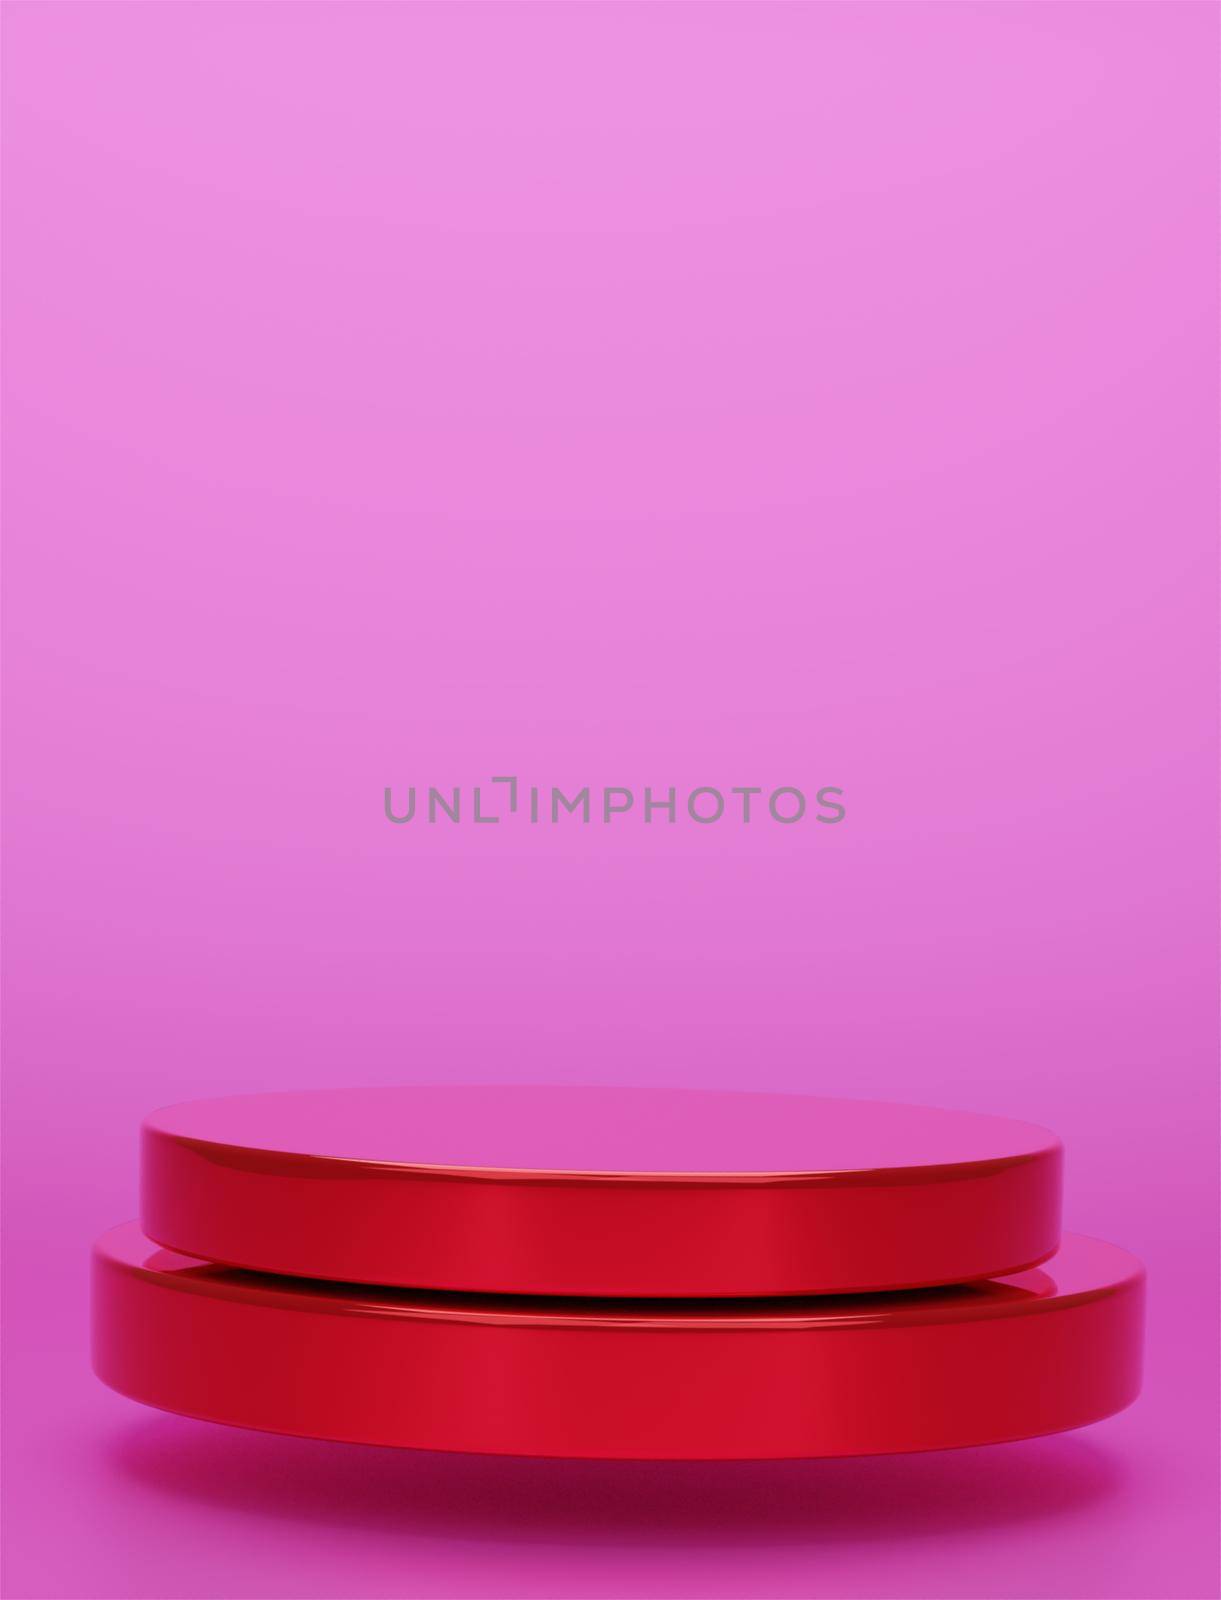 Red geometric circular background vertical image display podium prototype simple podium and commercial product concept pink background 3d rendering